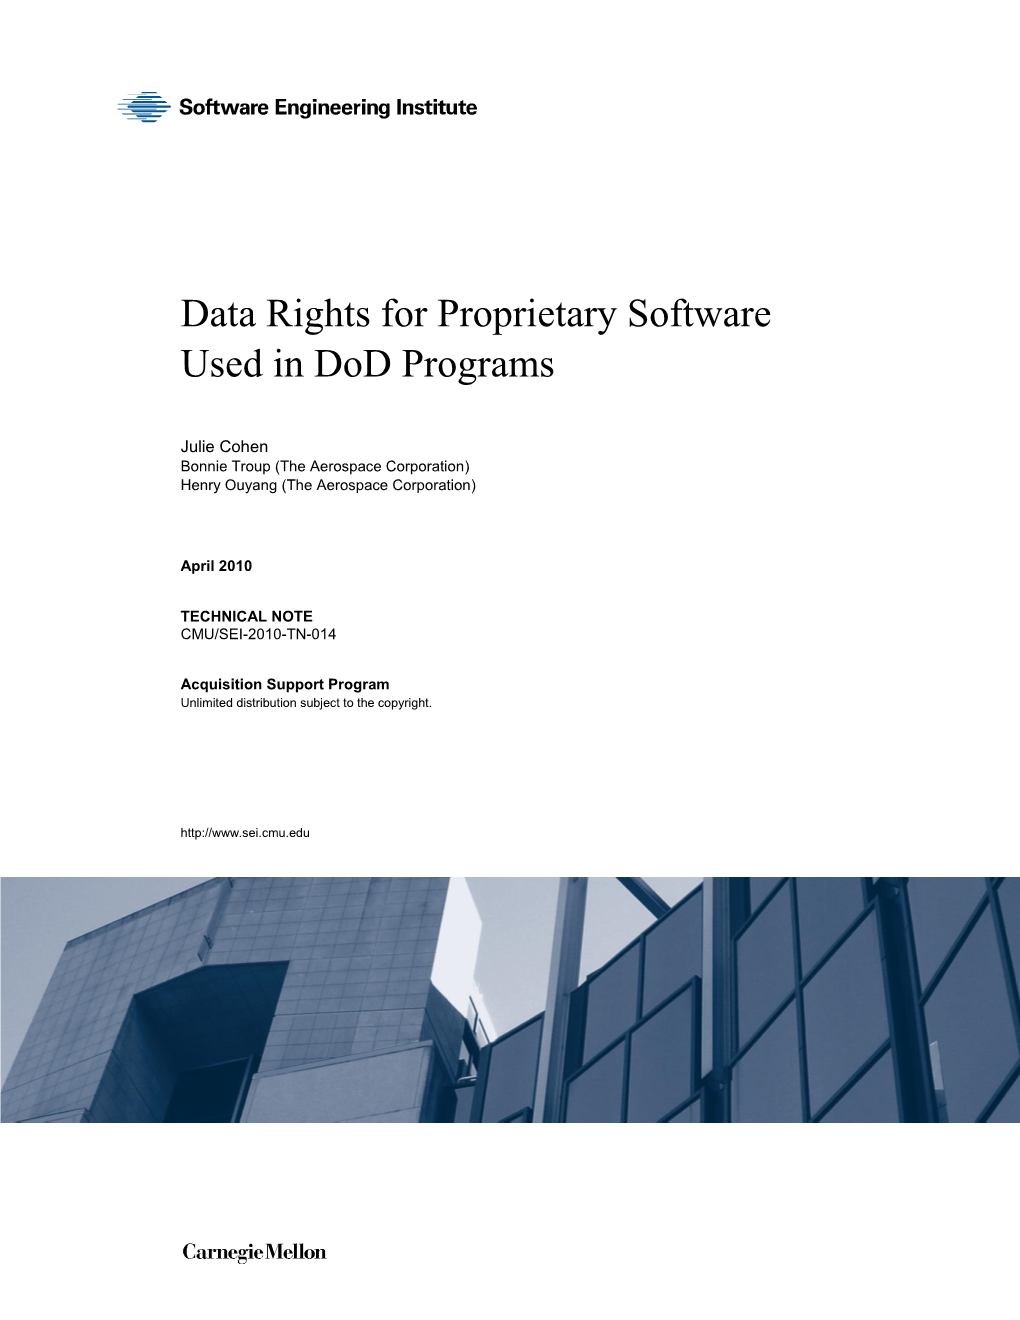 Data Rights for Proprietary Software Used in Dod Programs